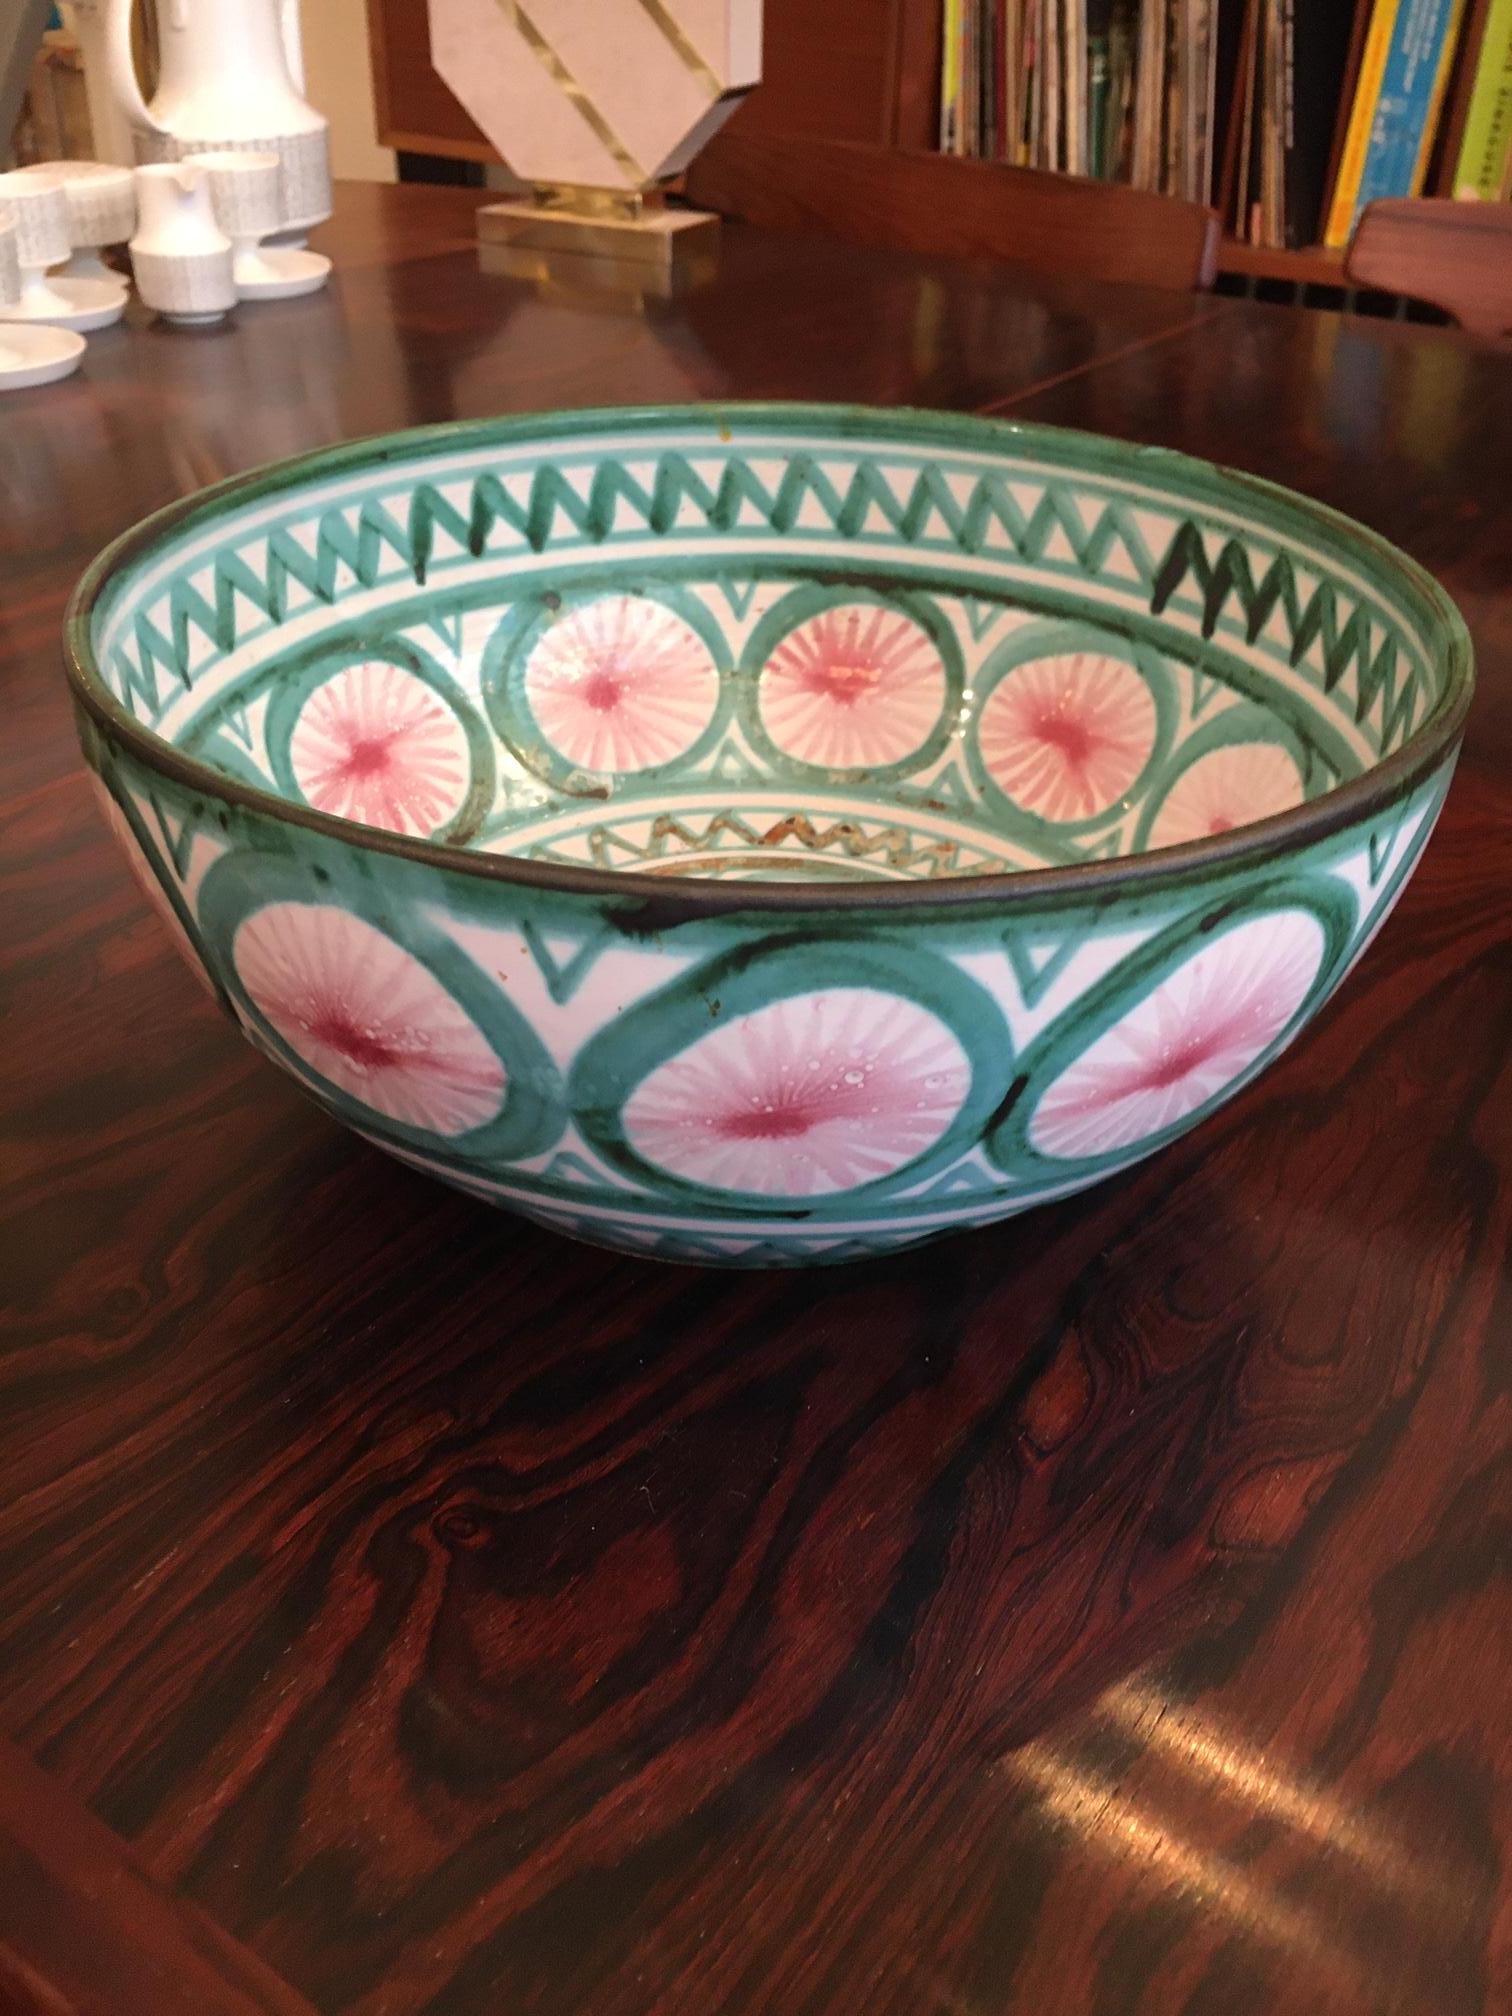 Large hand painted glazed ceramic bowl by Robert Picault made in Vallauris, France, ca. 1950s.
Robert Picault was one of the ceramists working in Vallauris during the 50's along with various artists and the most well known Pablo Picasso.
This large